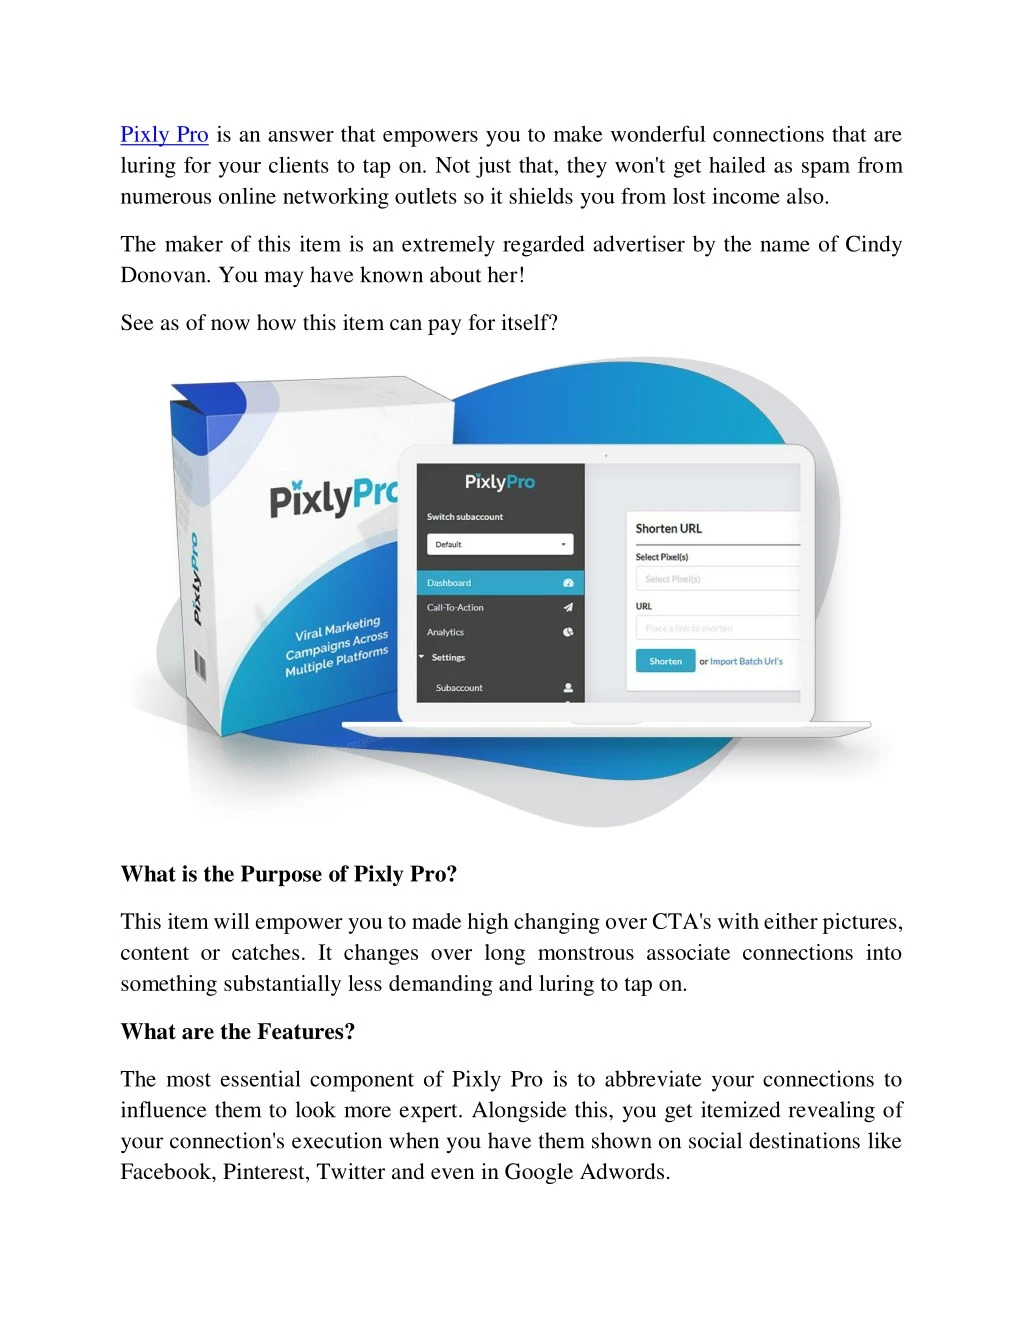 pixly pro is an answer that empowers you to make